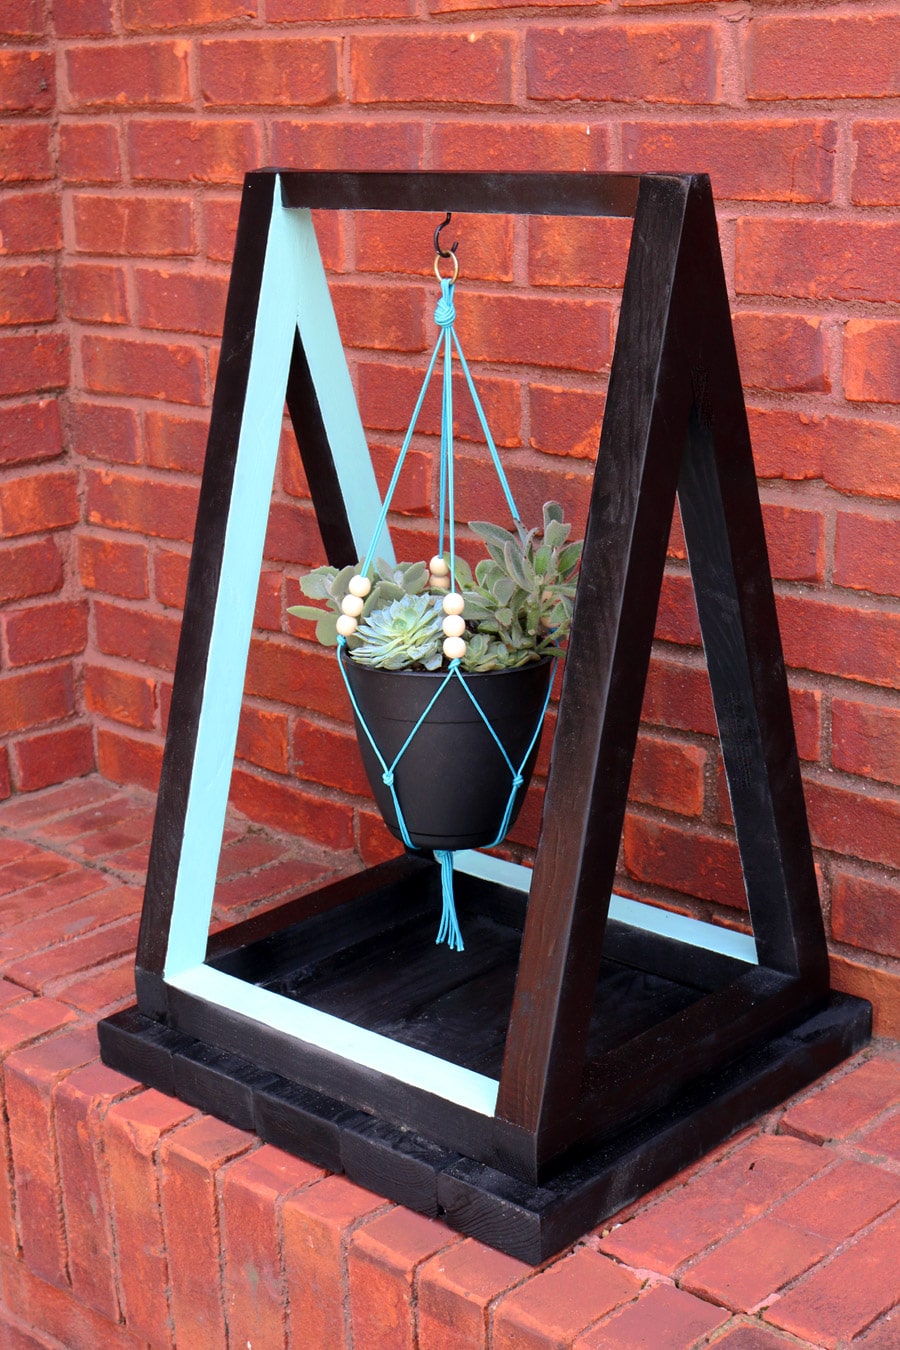 How to build a triangle hanging planter